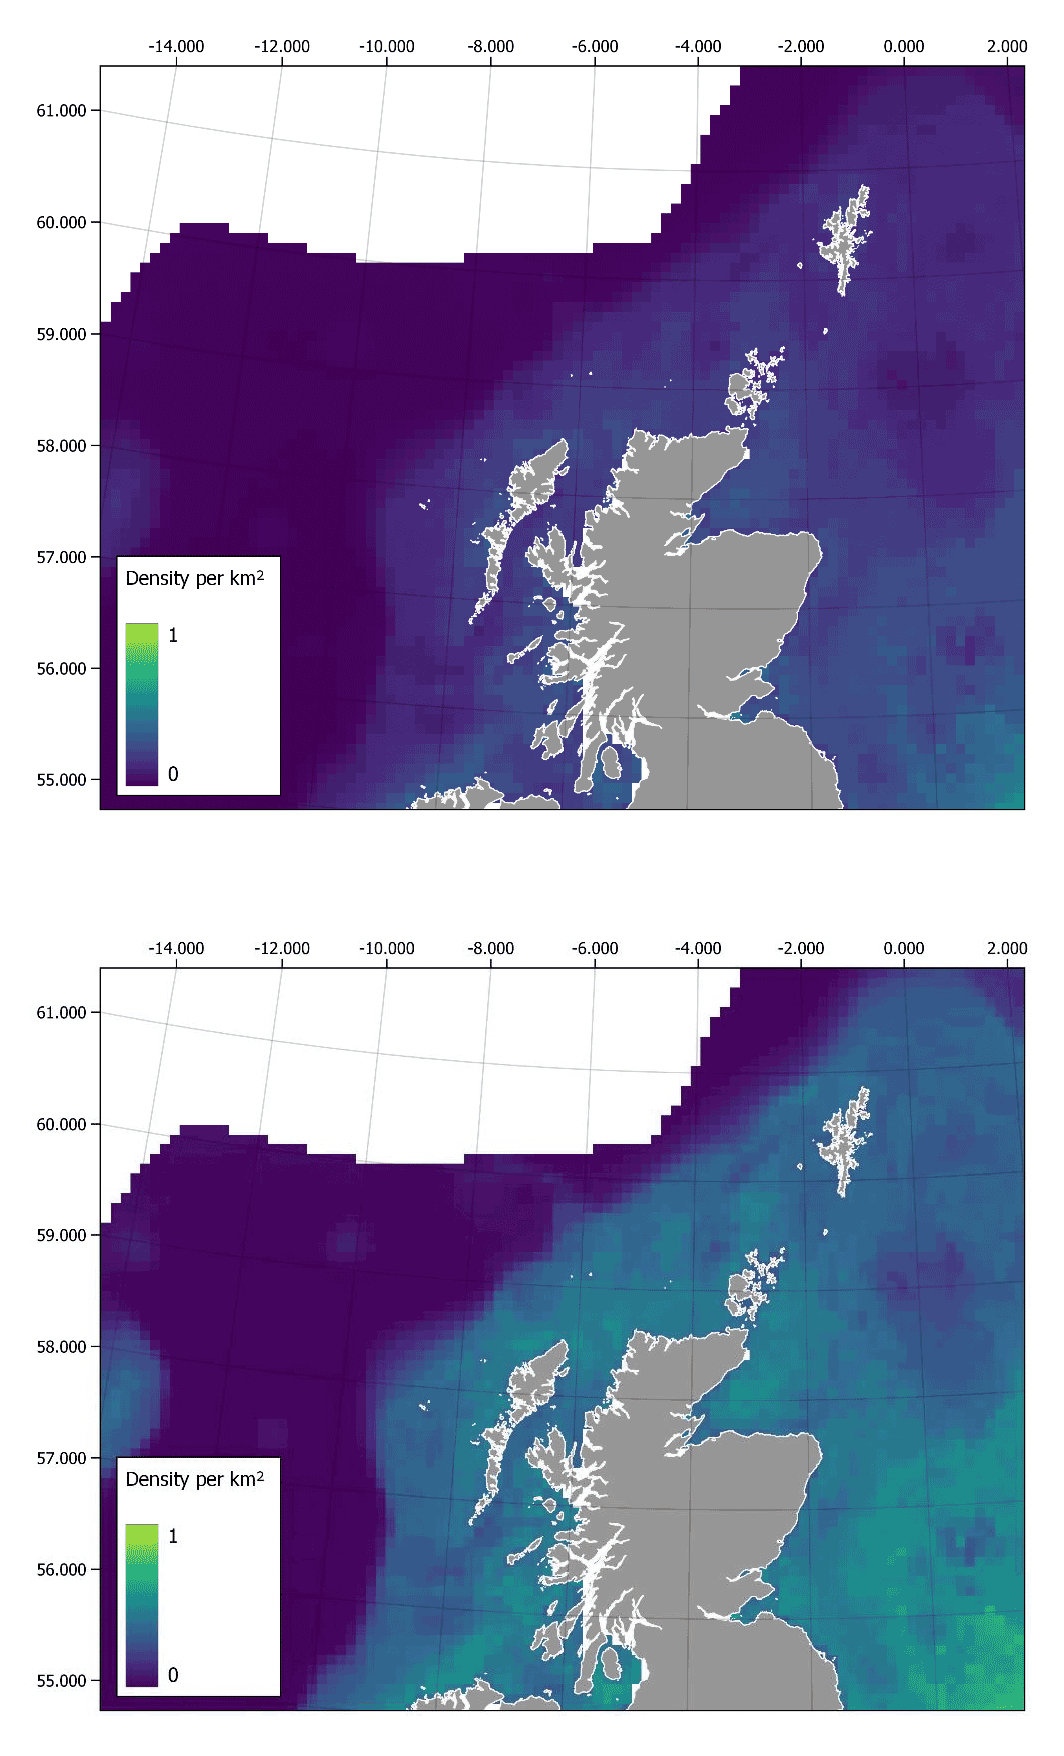 Two maps of Scotland showing predicted harbour porpoise densities in January and July. Densities are highest in the southern north sea and decrease towards the north and west and are higher in all regions in July when compared with January.